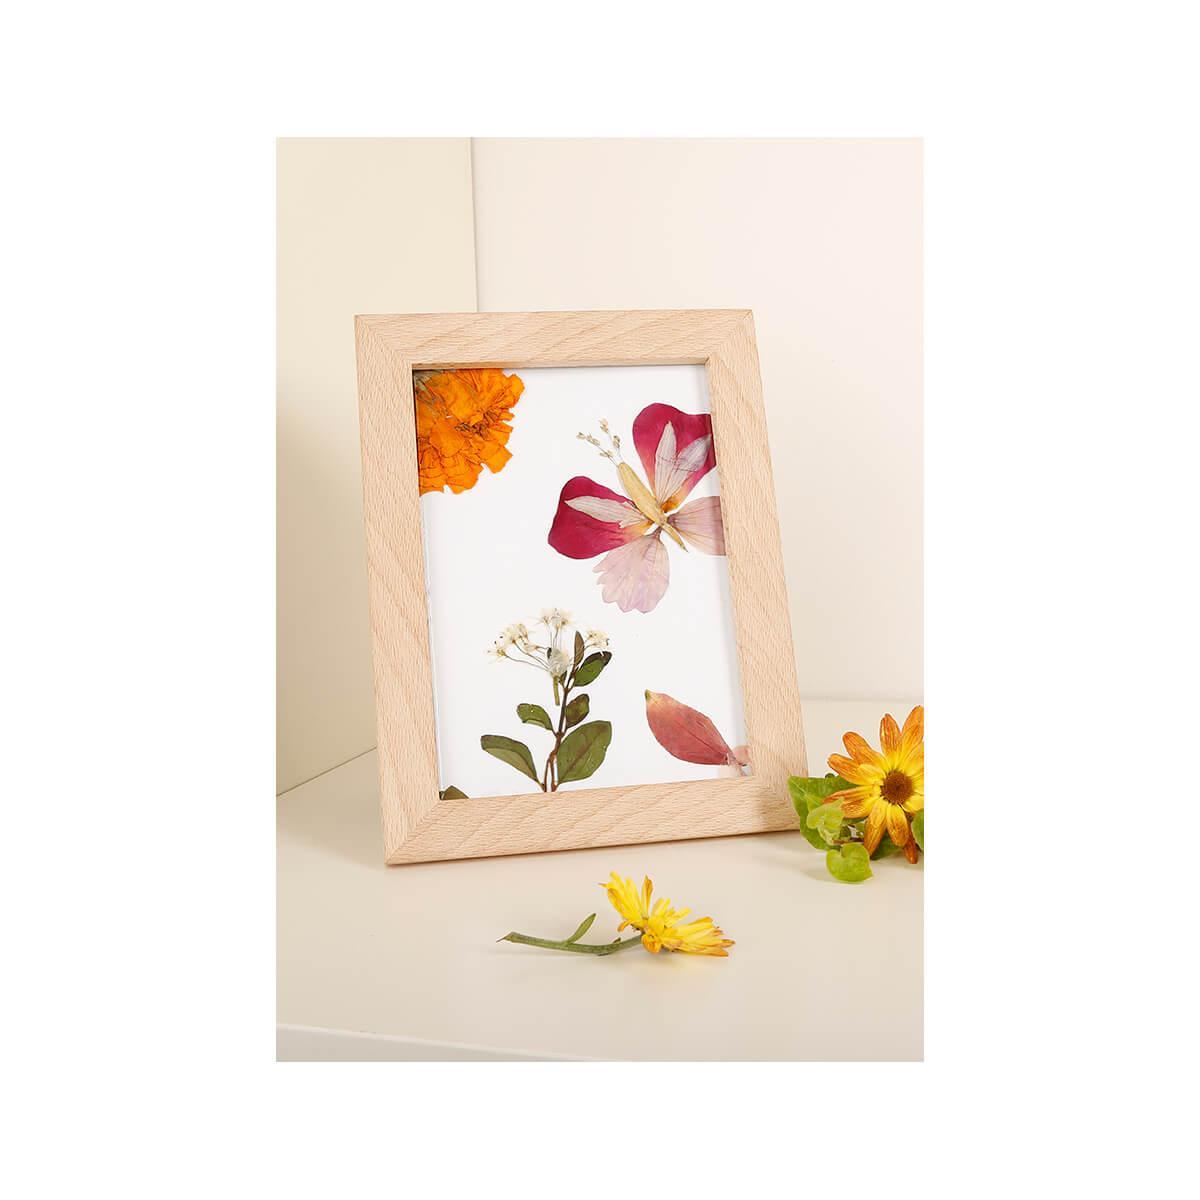 Create Your Own Pressed Flower Art - Craft Kits - Art + Craft - Adults -  Hinkler